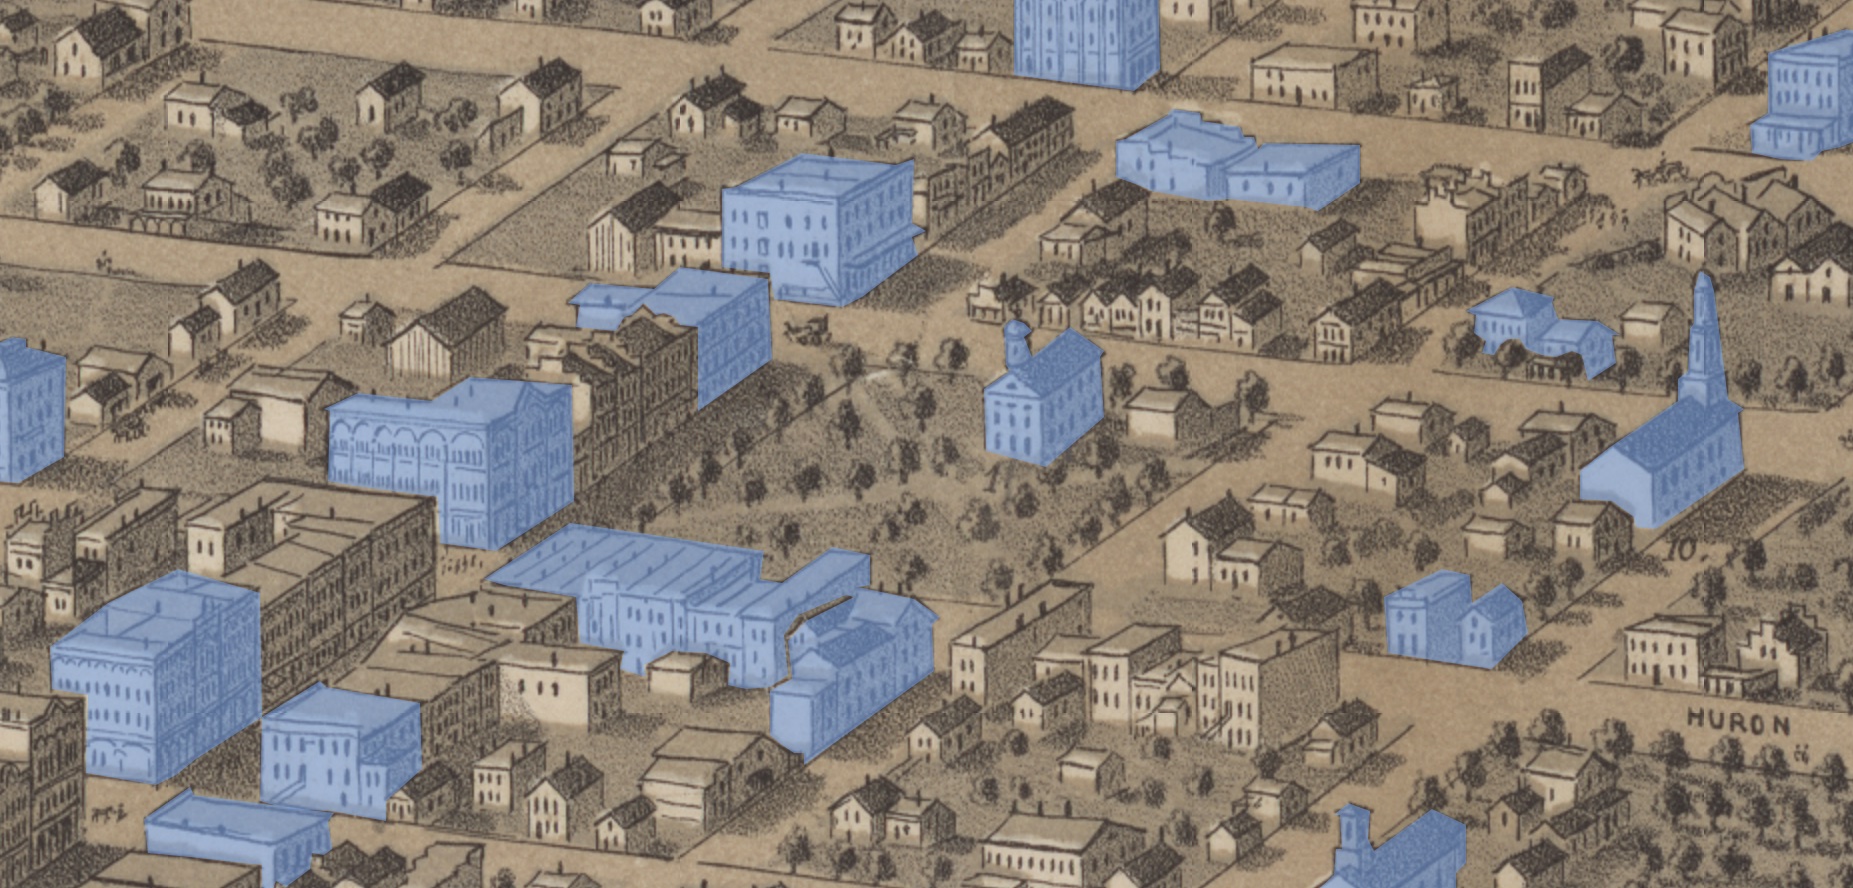 A zoomed-in portion of the 1866 map showing highlighted buildings